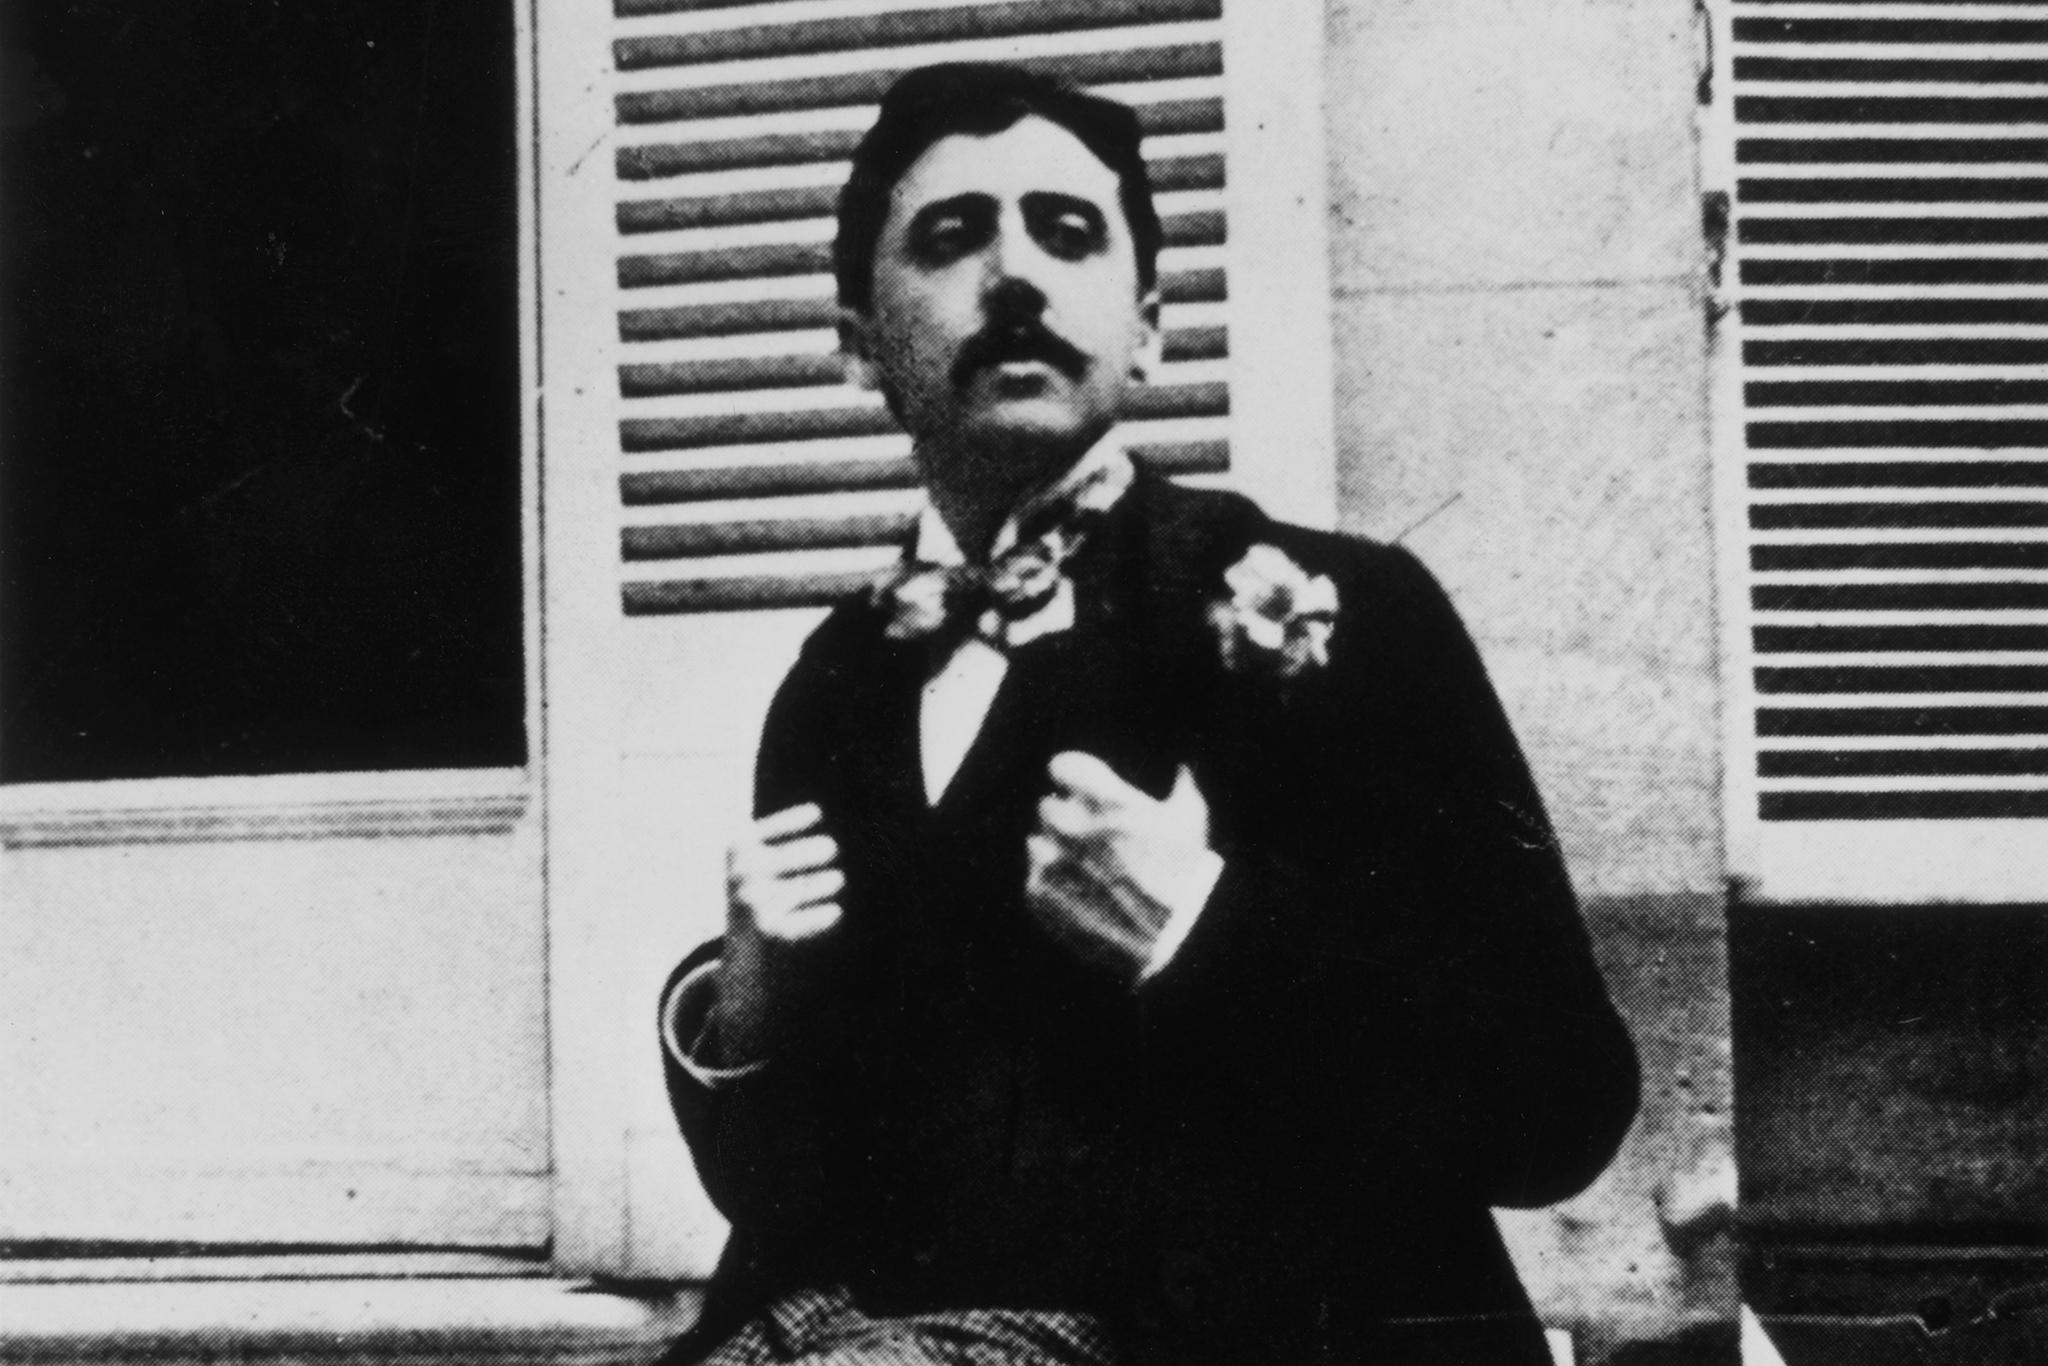 I felt a personal connection to Proust long before I knew the nature of his achievement